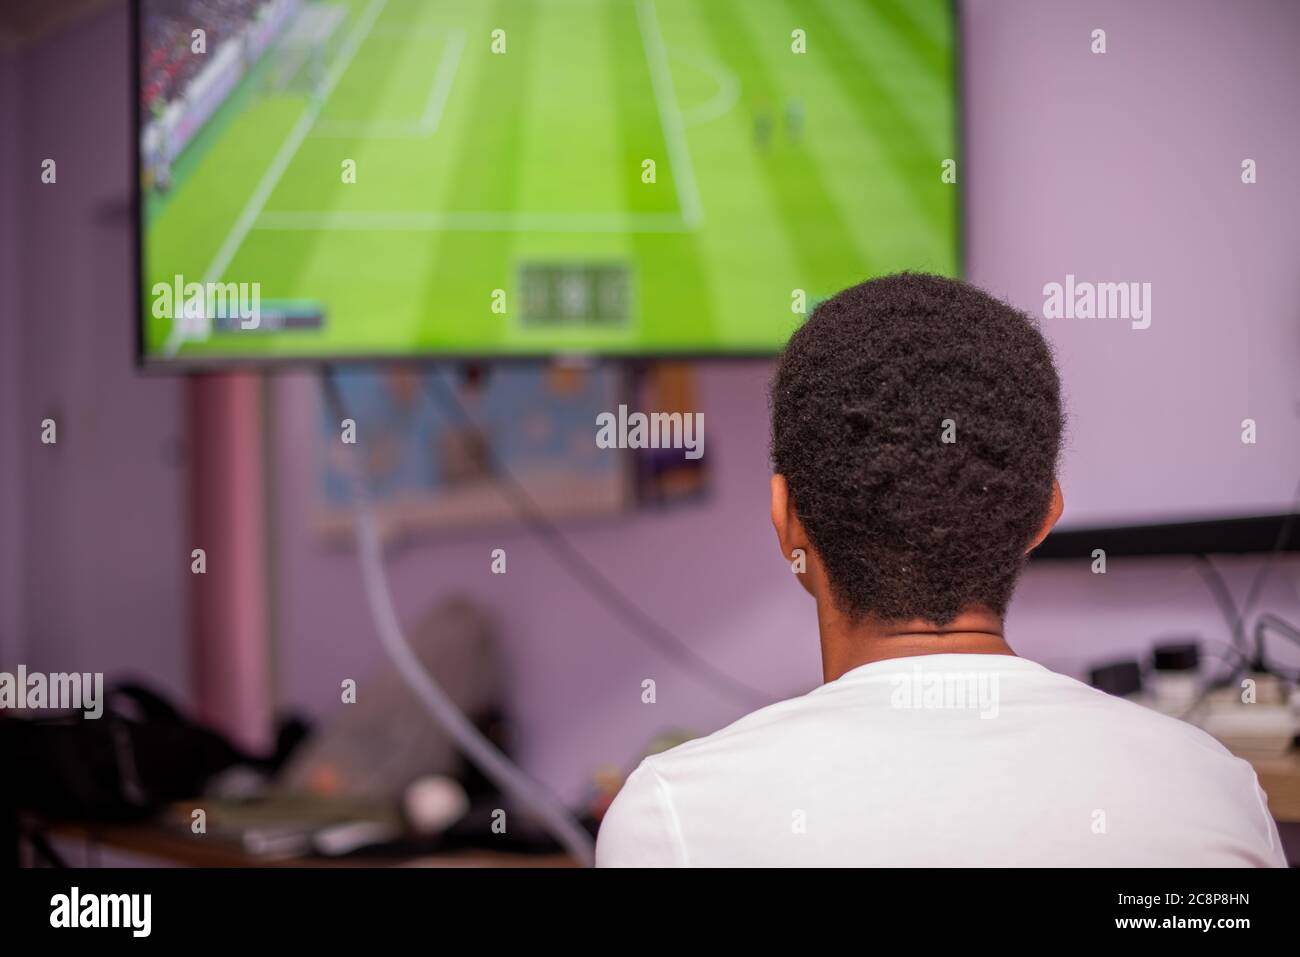 Young boy shot from behind while playing games Stock Photo